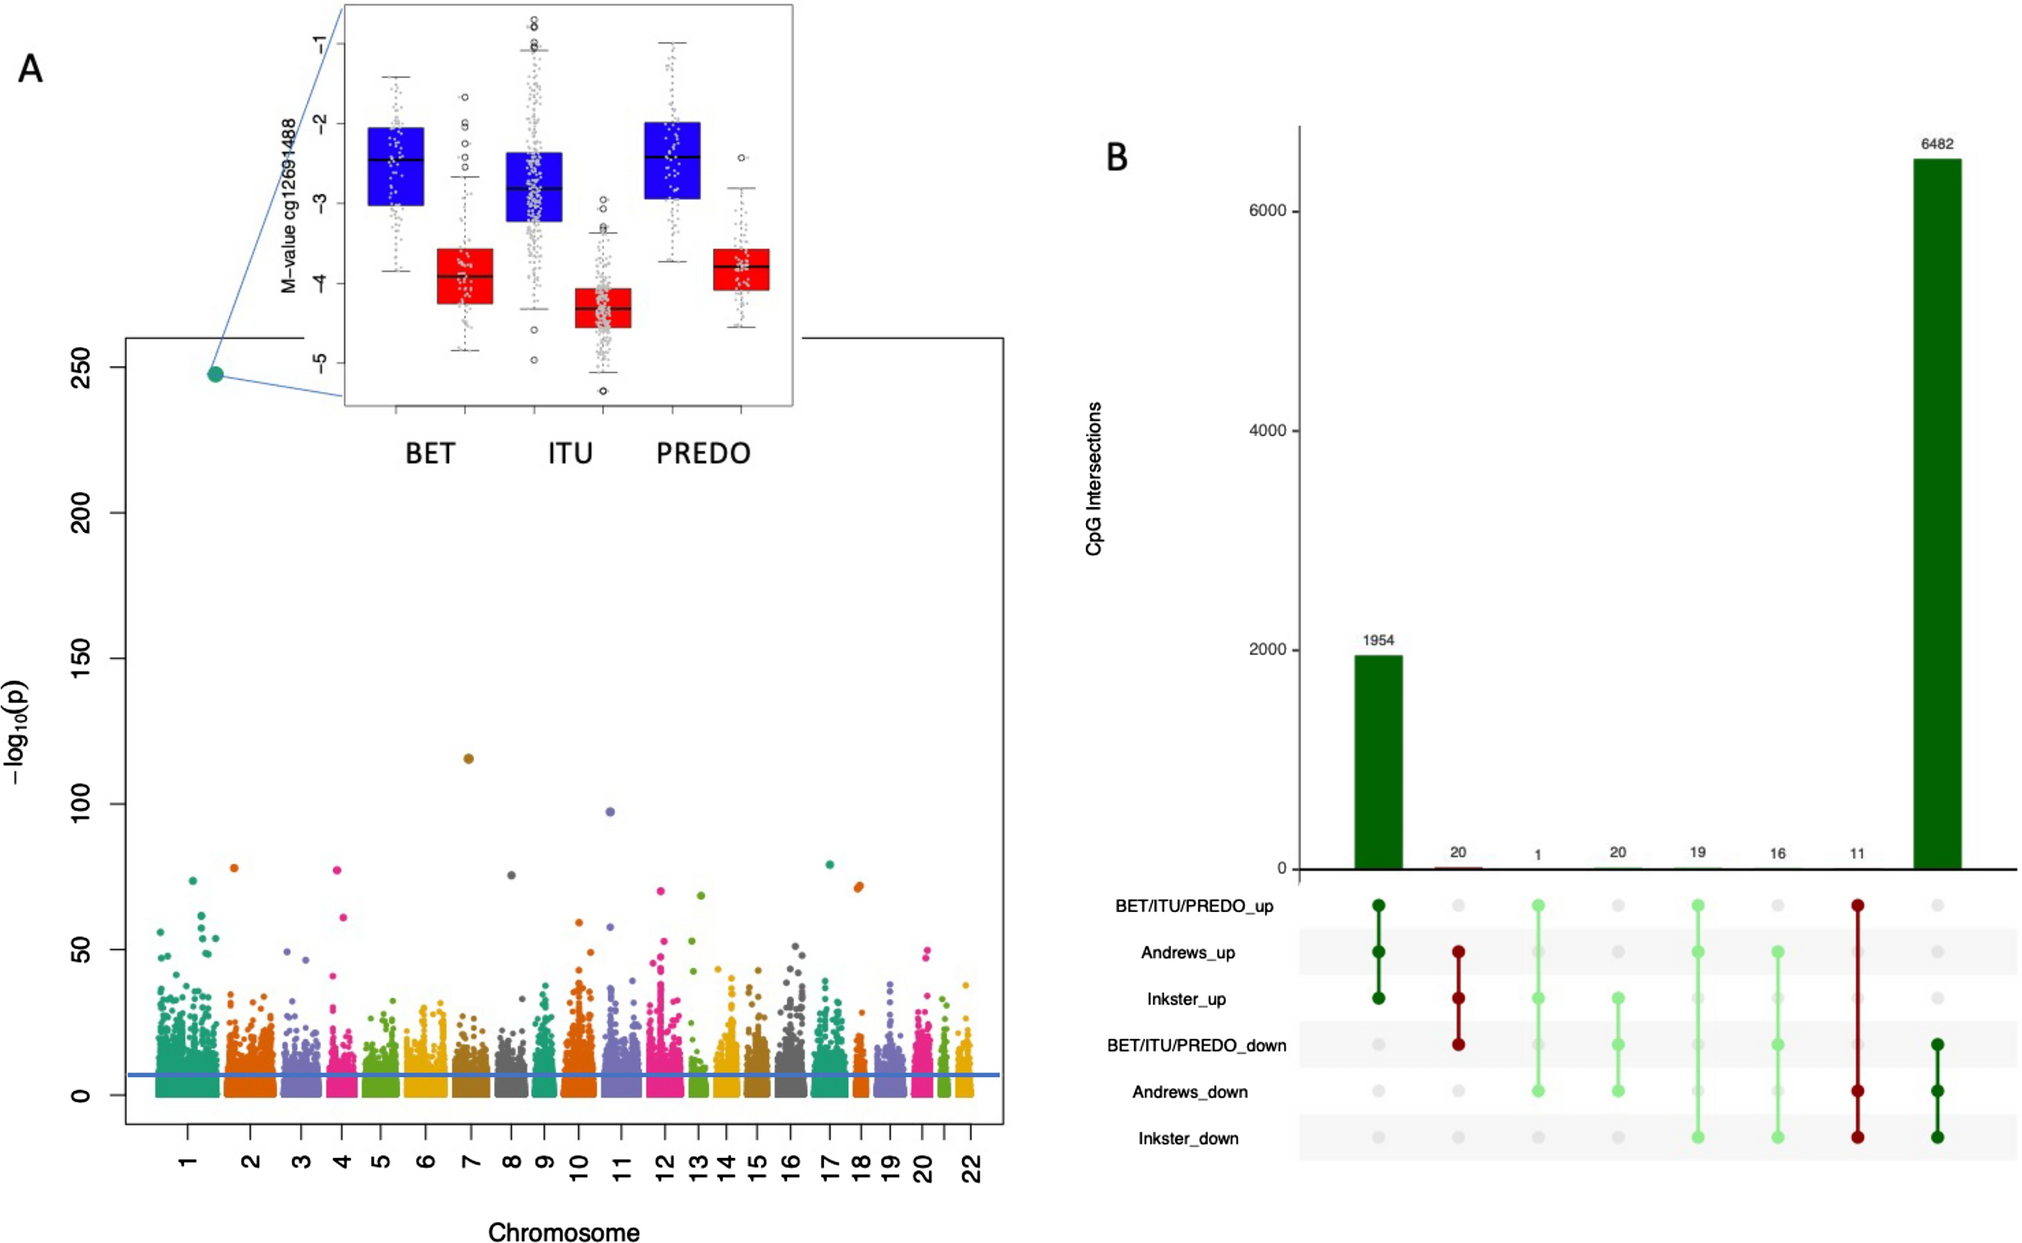 Sex differences in DNA methylation across gestation: a large scale, cross-cohort, multi-tissue analysis